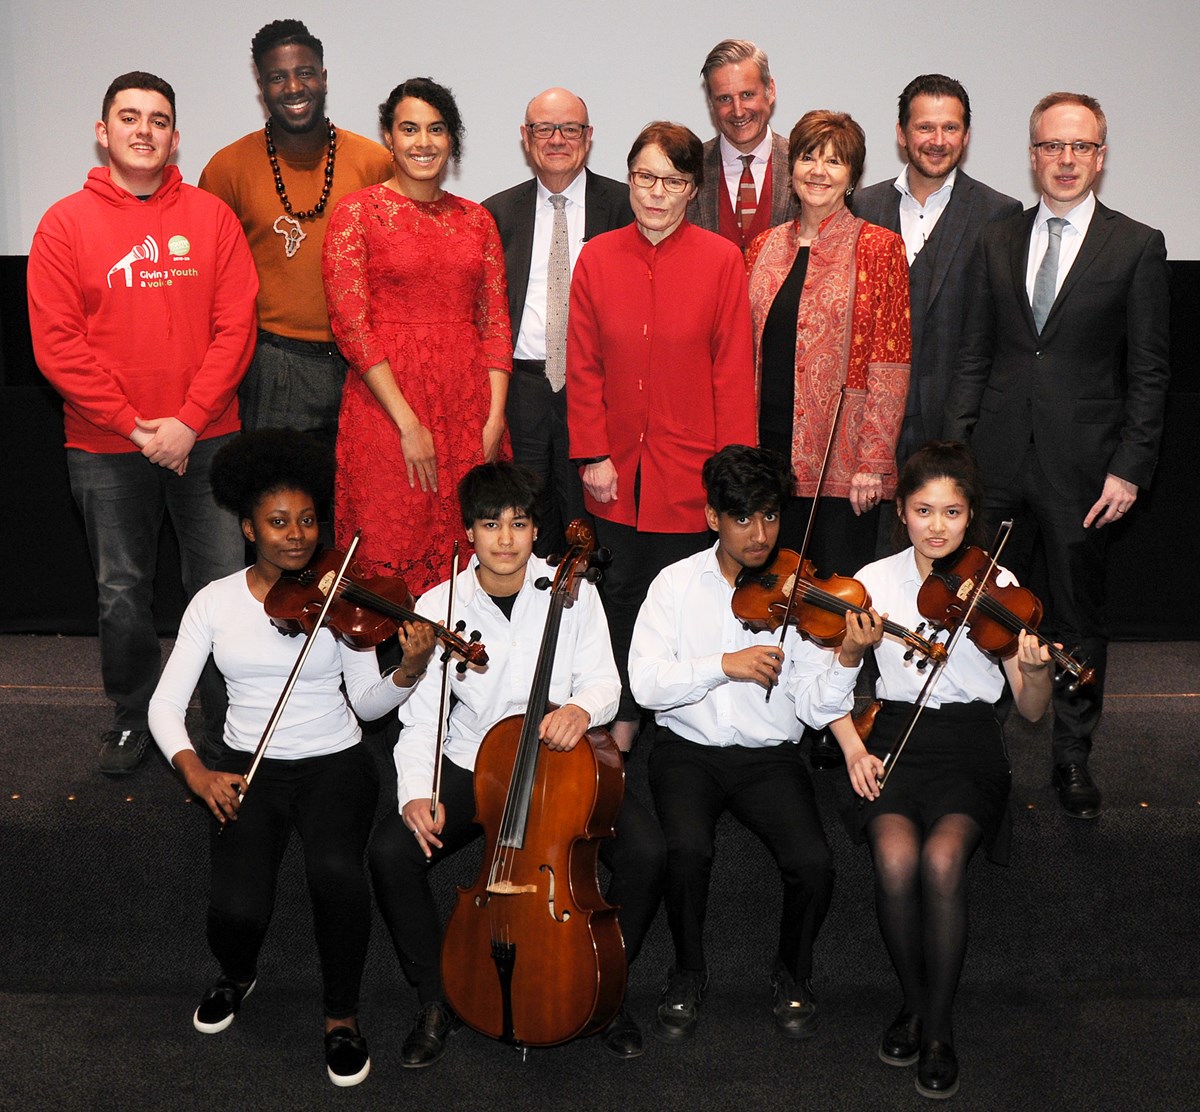 At the launch were the Music in Secondary Schools Trust Saturday School Quartet (front row, from left) Cherie Chan, Sara Pelham, Farah Wadud and Aaliyah Lakeman, with (top row, from left) Benjamin Boukerma (Islington Youth Councillor), Jermain Jackman (chair of Islington Fair Futures Commission), Cl